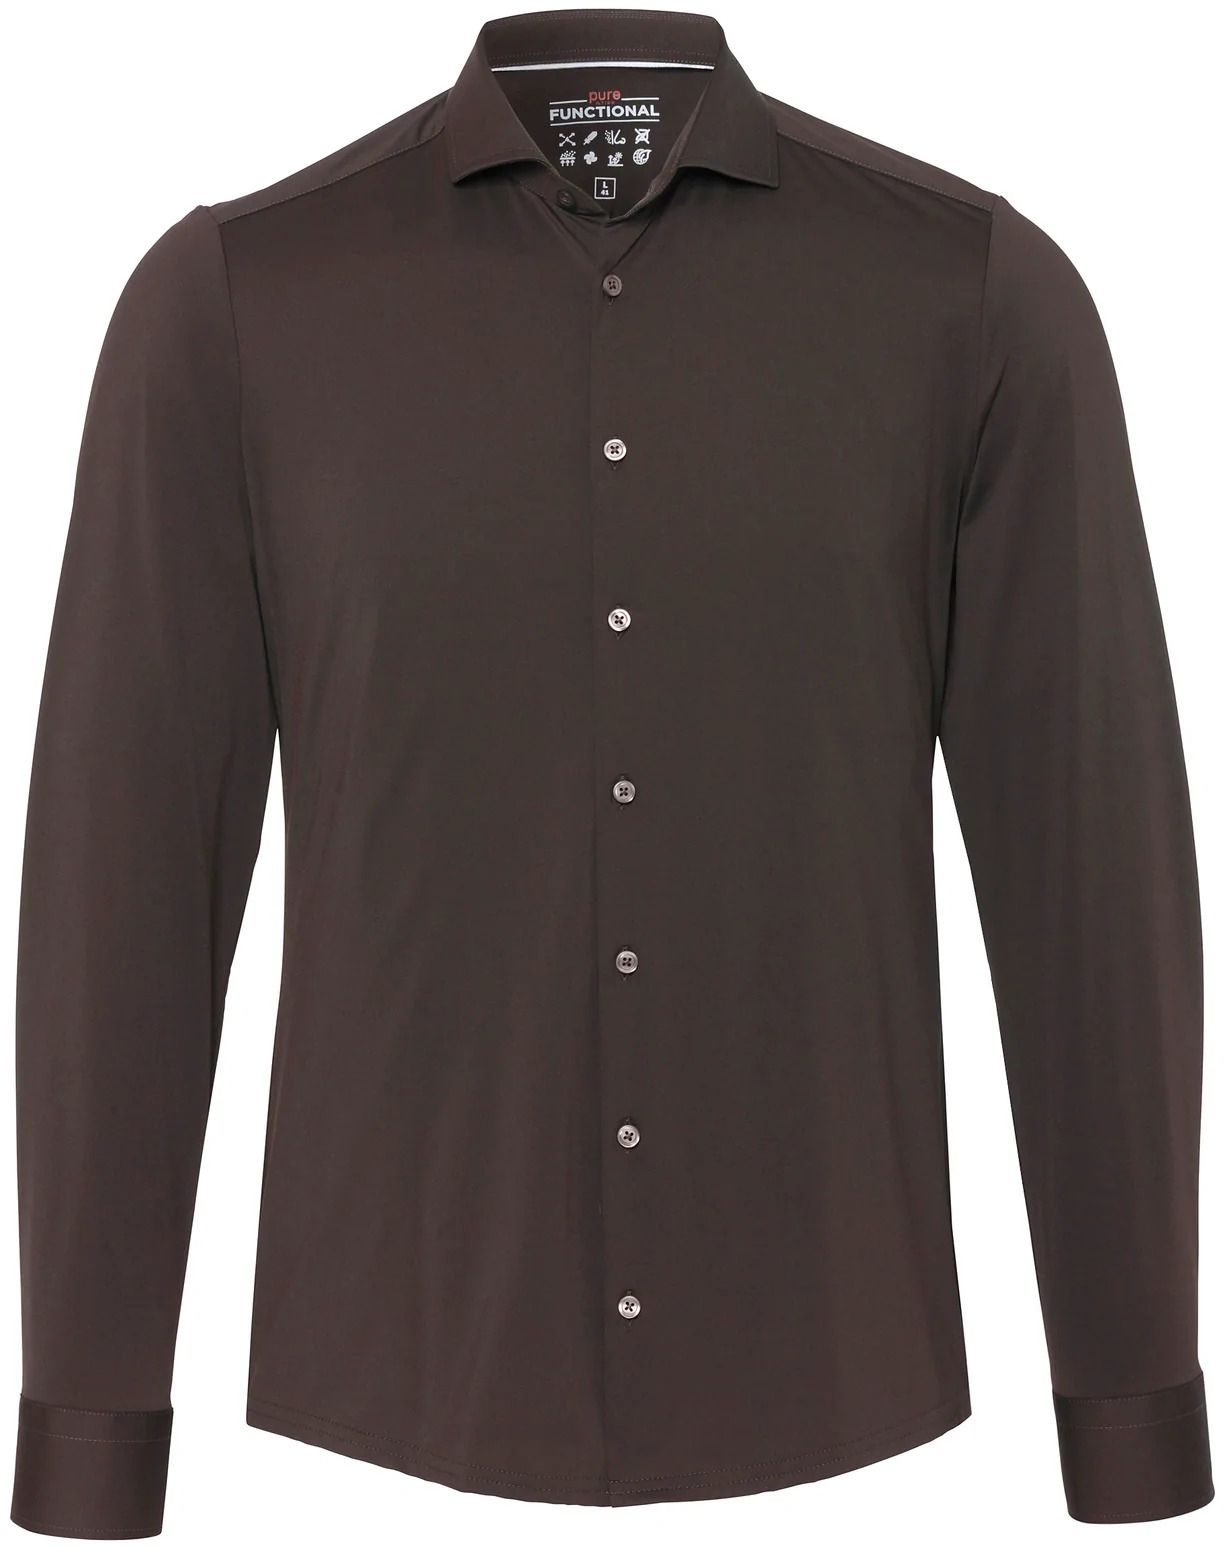 Pure The Functional Shirt Dark Brown size 15